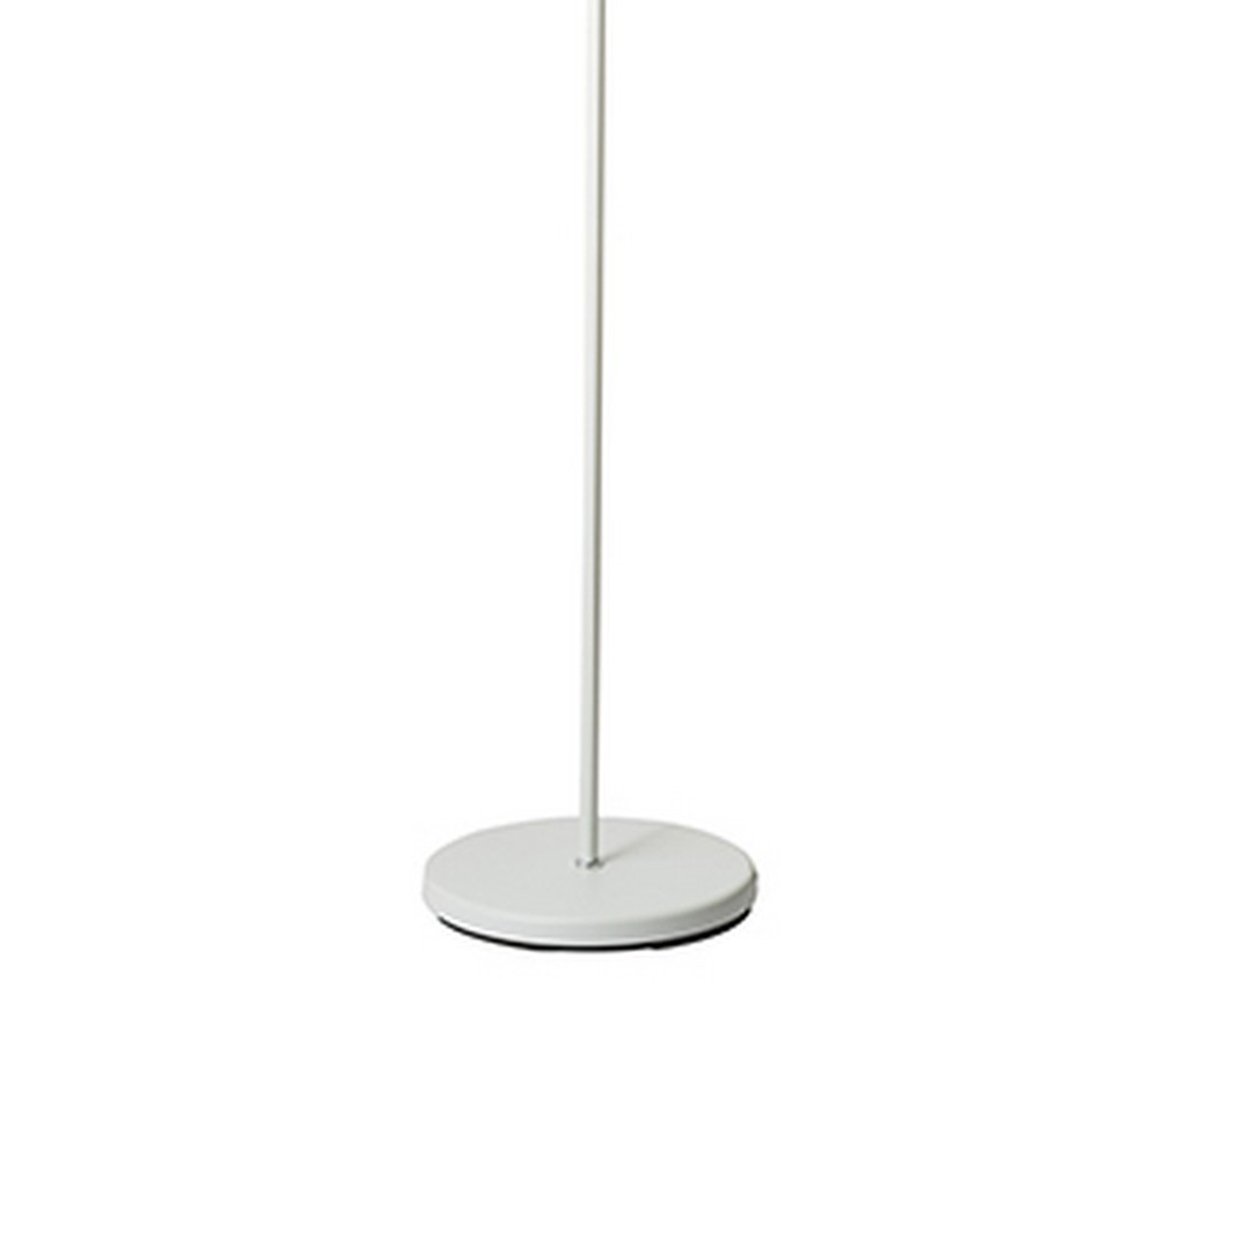 Torchiere Floor Lamp With Adjustable Disk Shade And Sleek Body, White- Saltoro Sherpi